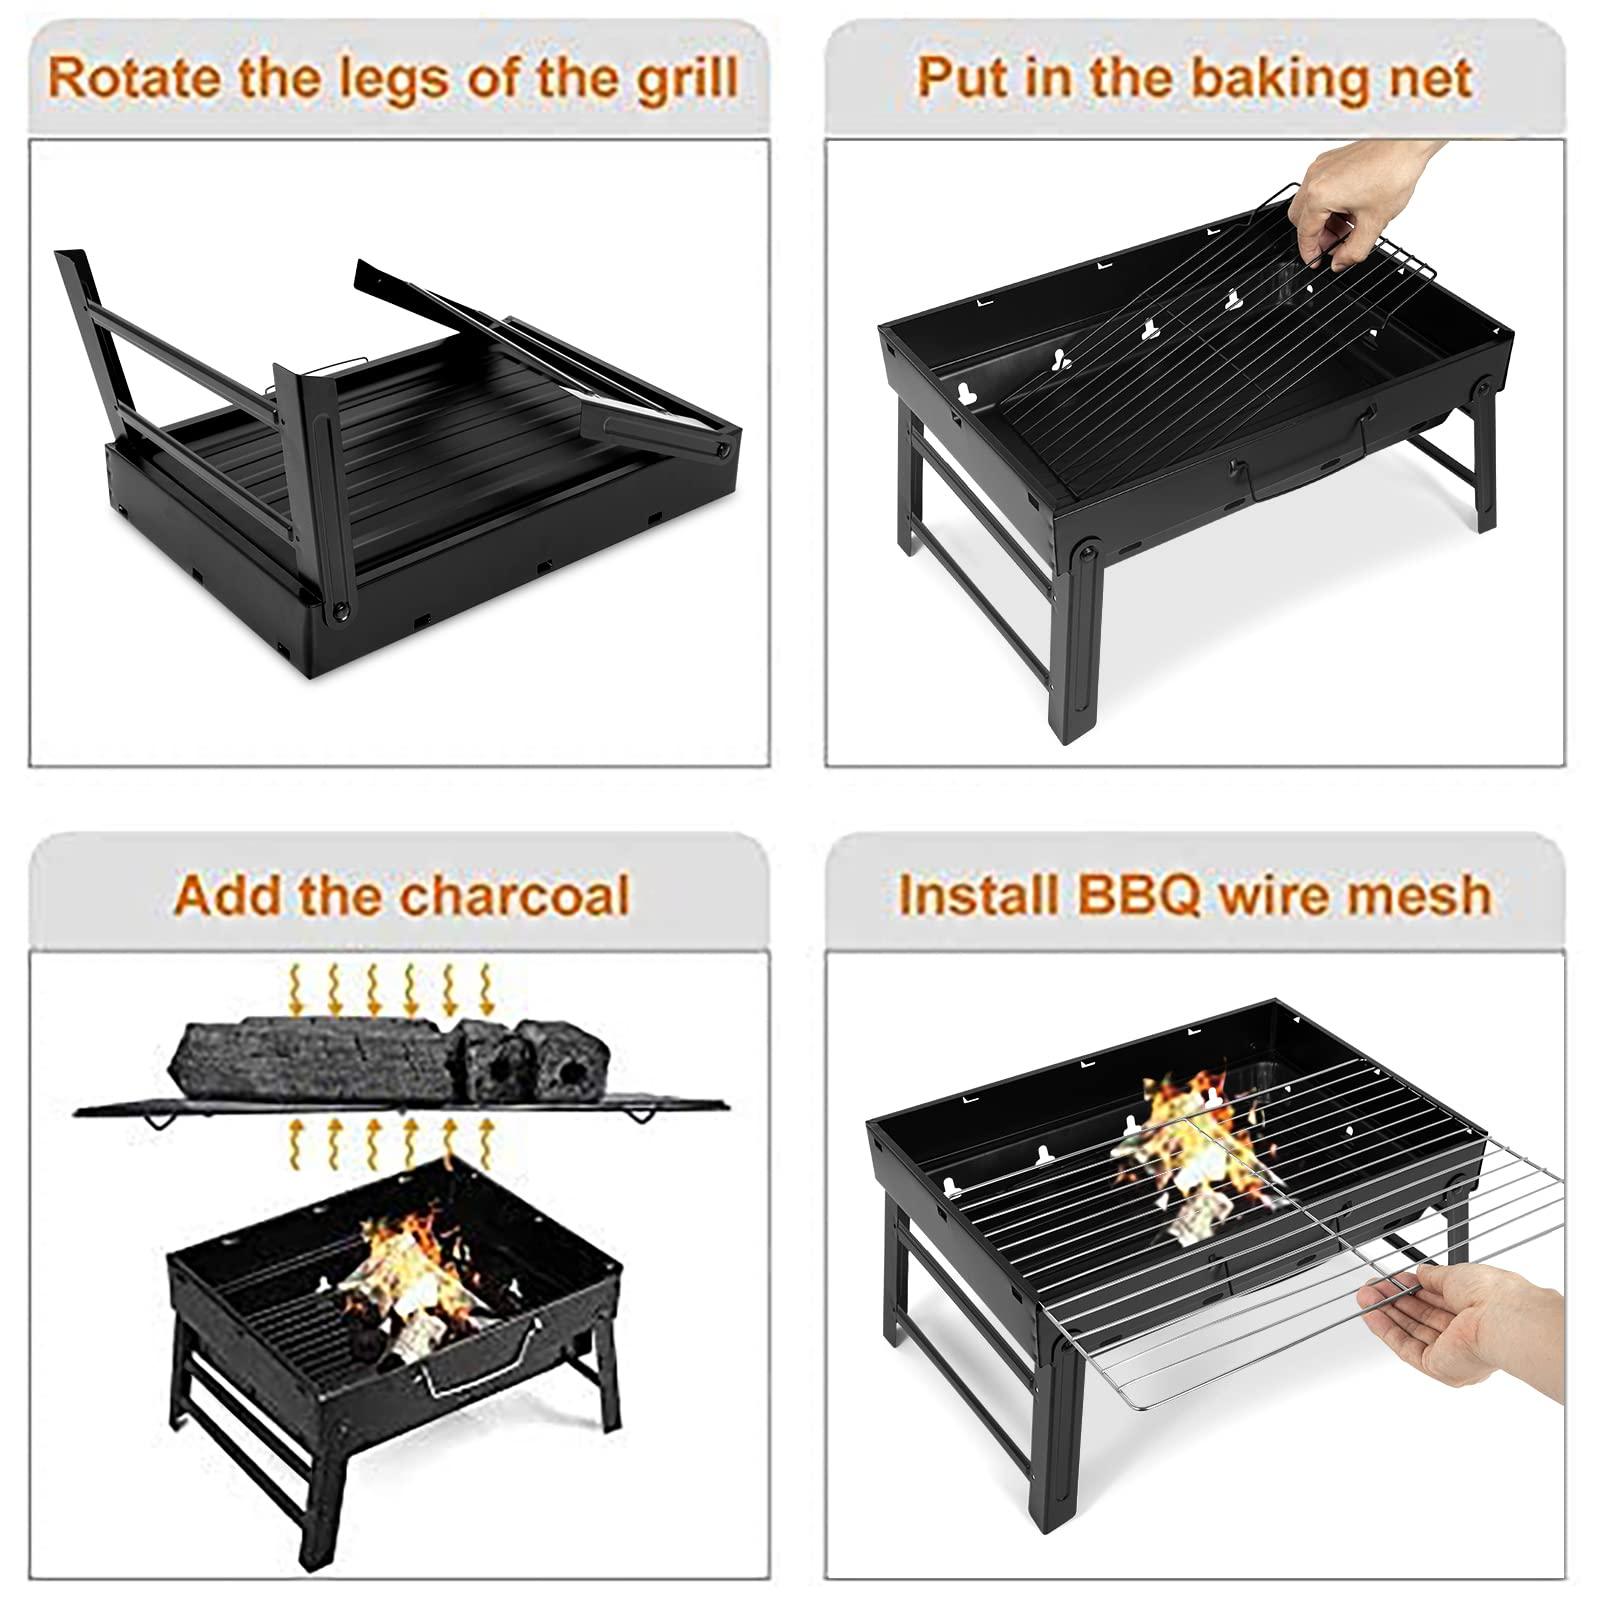 Barbecue Grill, Charcoal Grill Folding Portable Lightweight Barbecue Grill Tools for Outdoor Grilling Cooking Camping Hiking Picnics Tailgating Backpacking Party (Medium) - CookCave